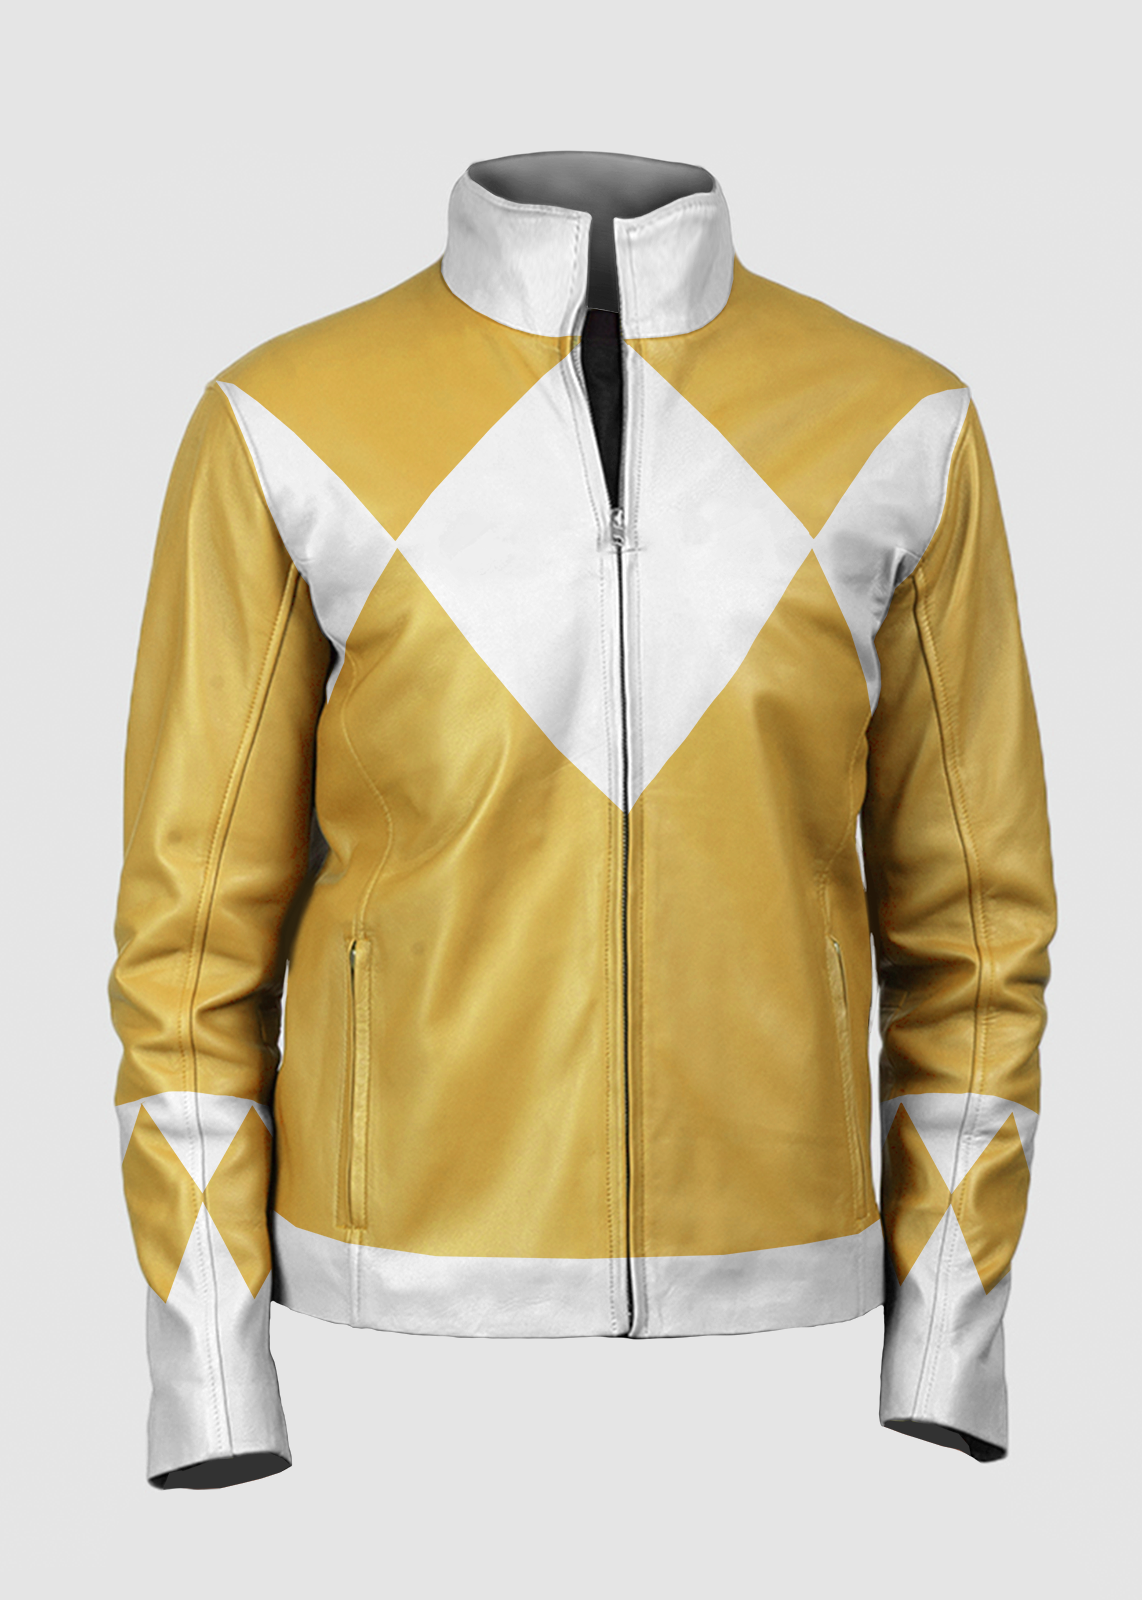 Womens Power Rangers Classic Leather Jacket Yellow